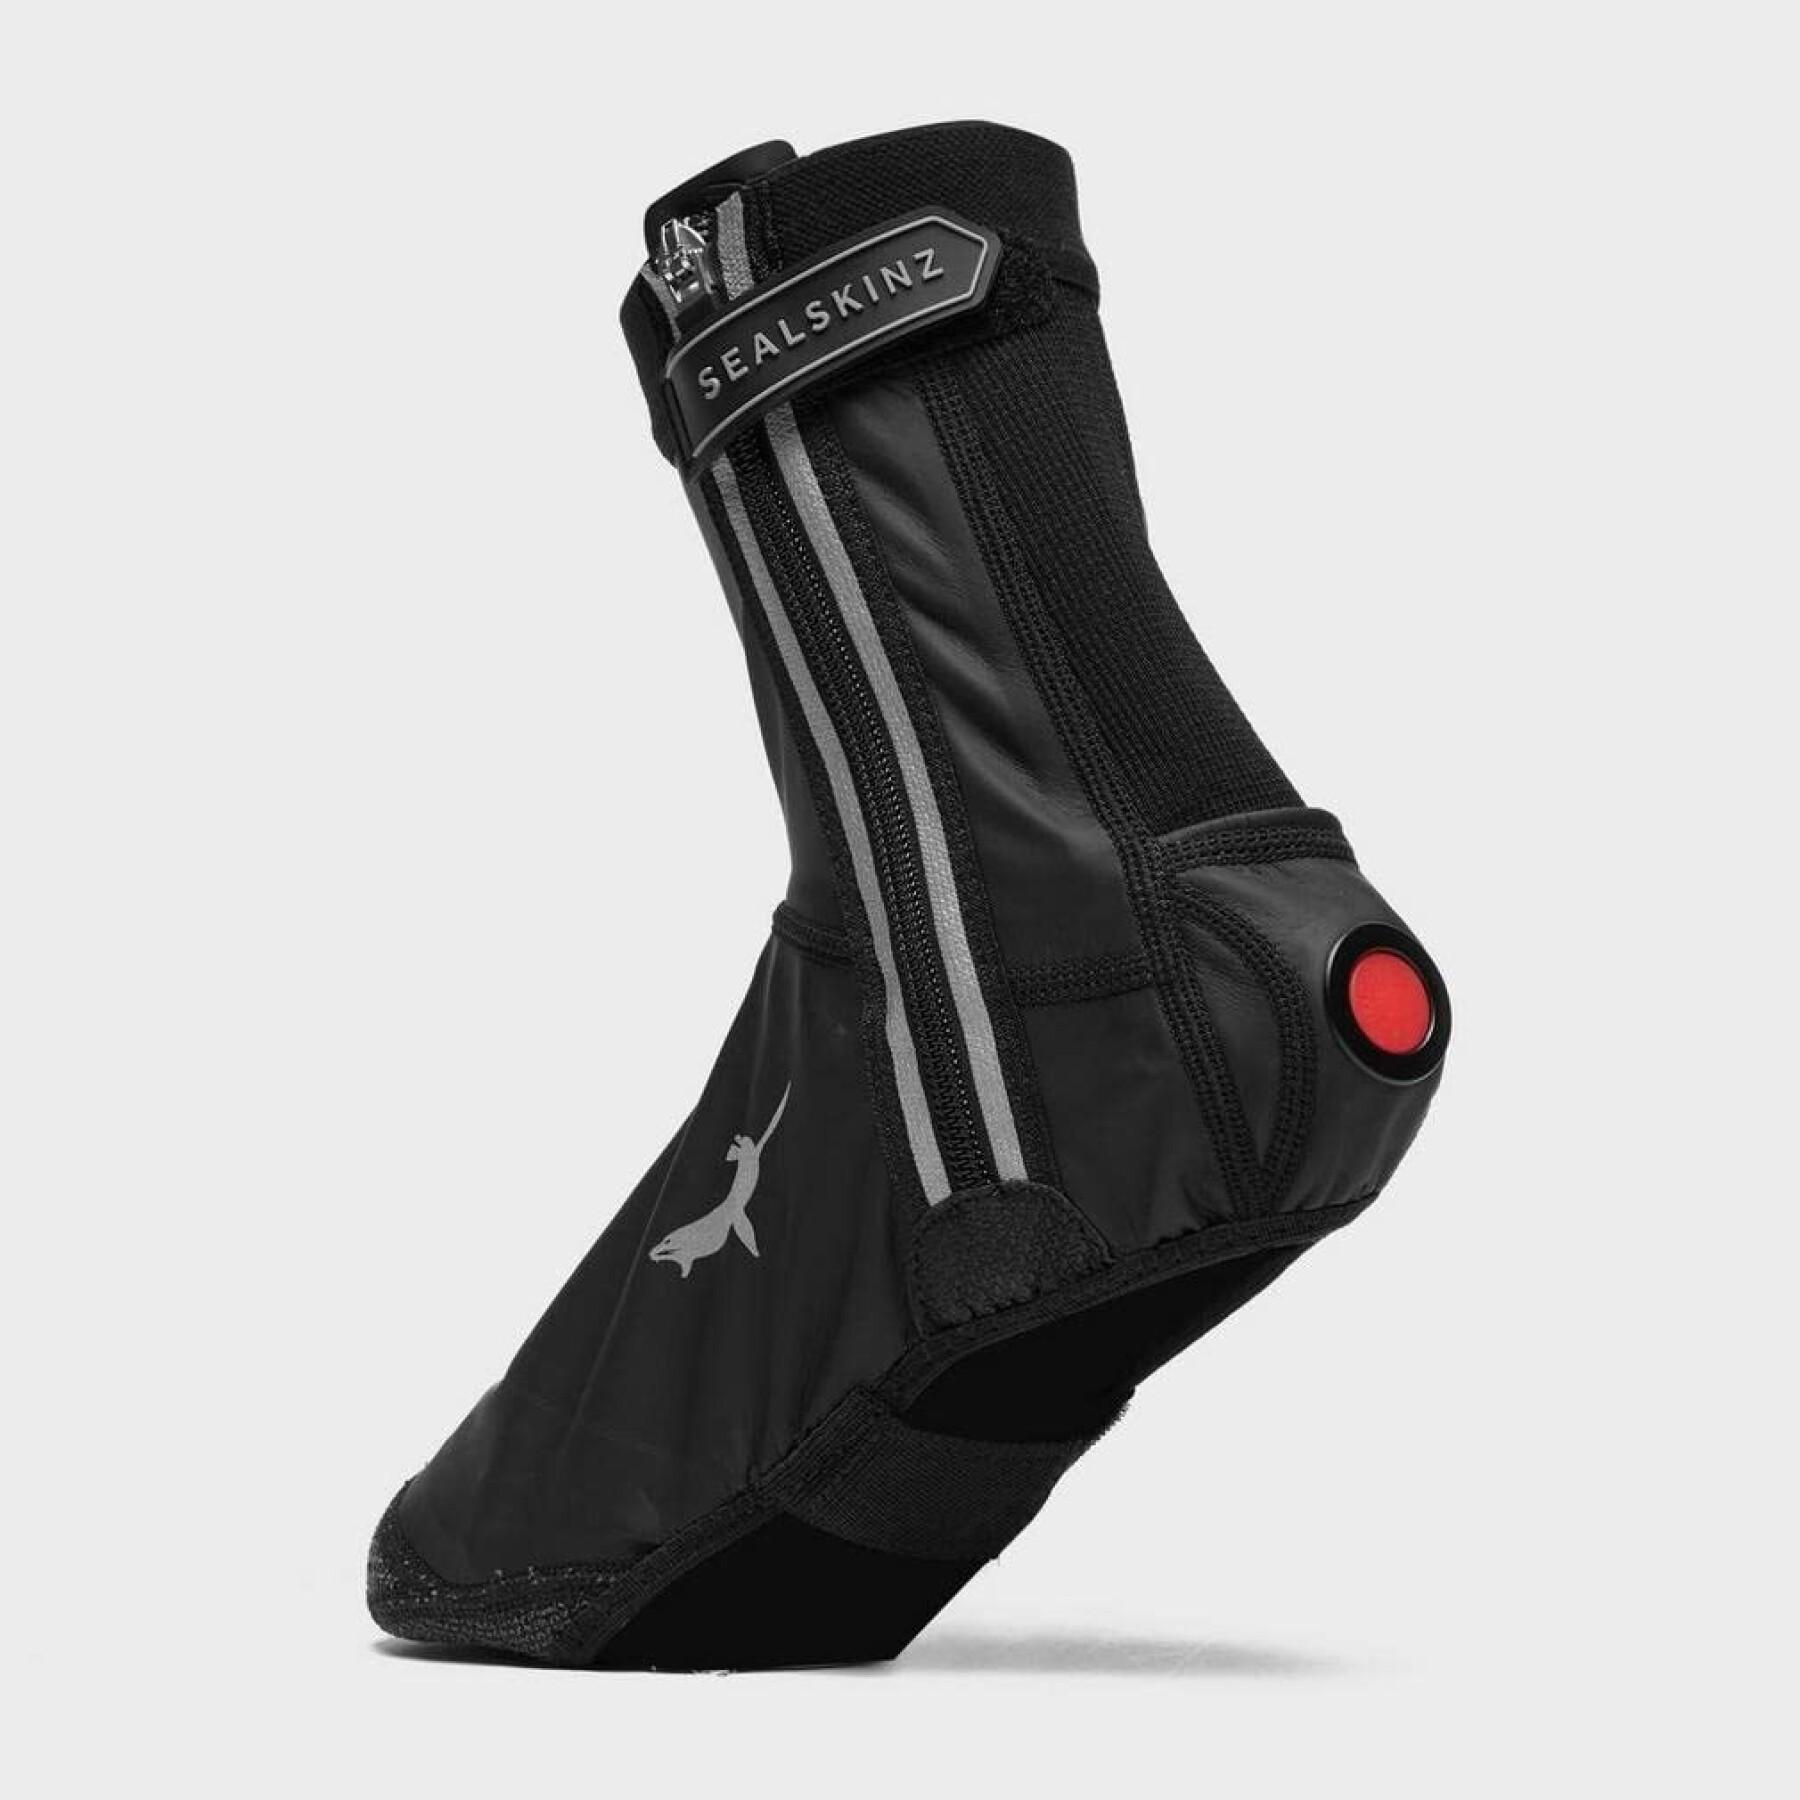 Shoe covers Sealskinz led open sole cycle